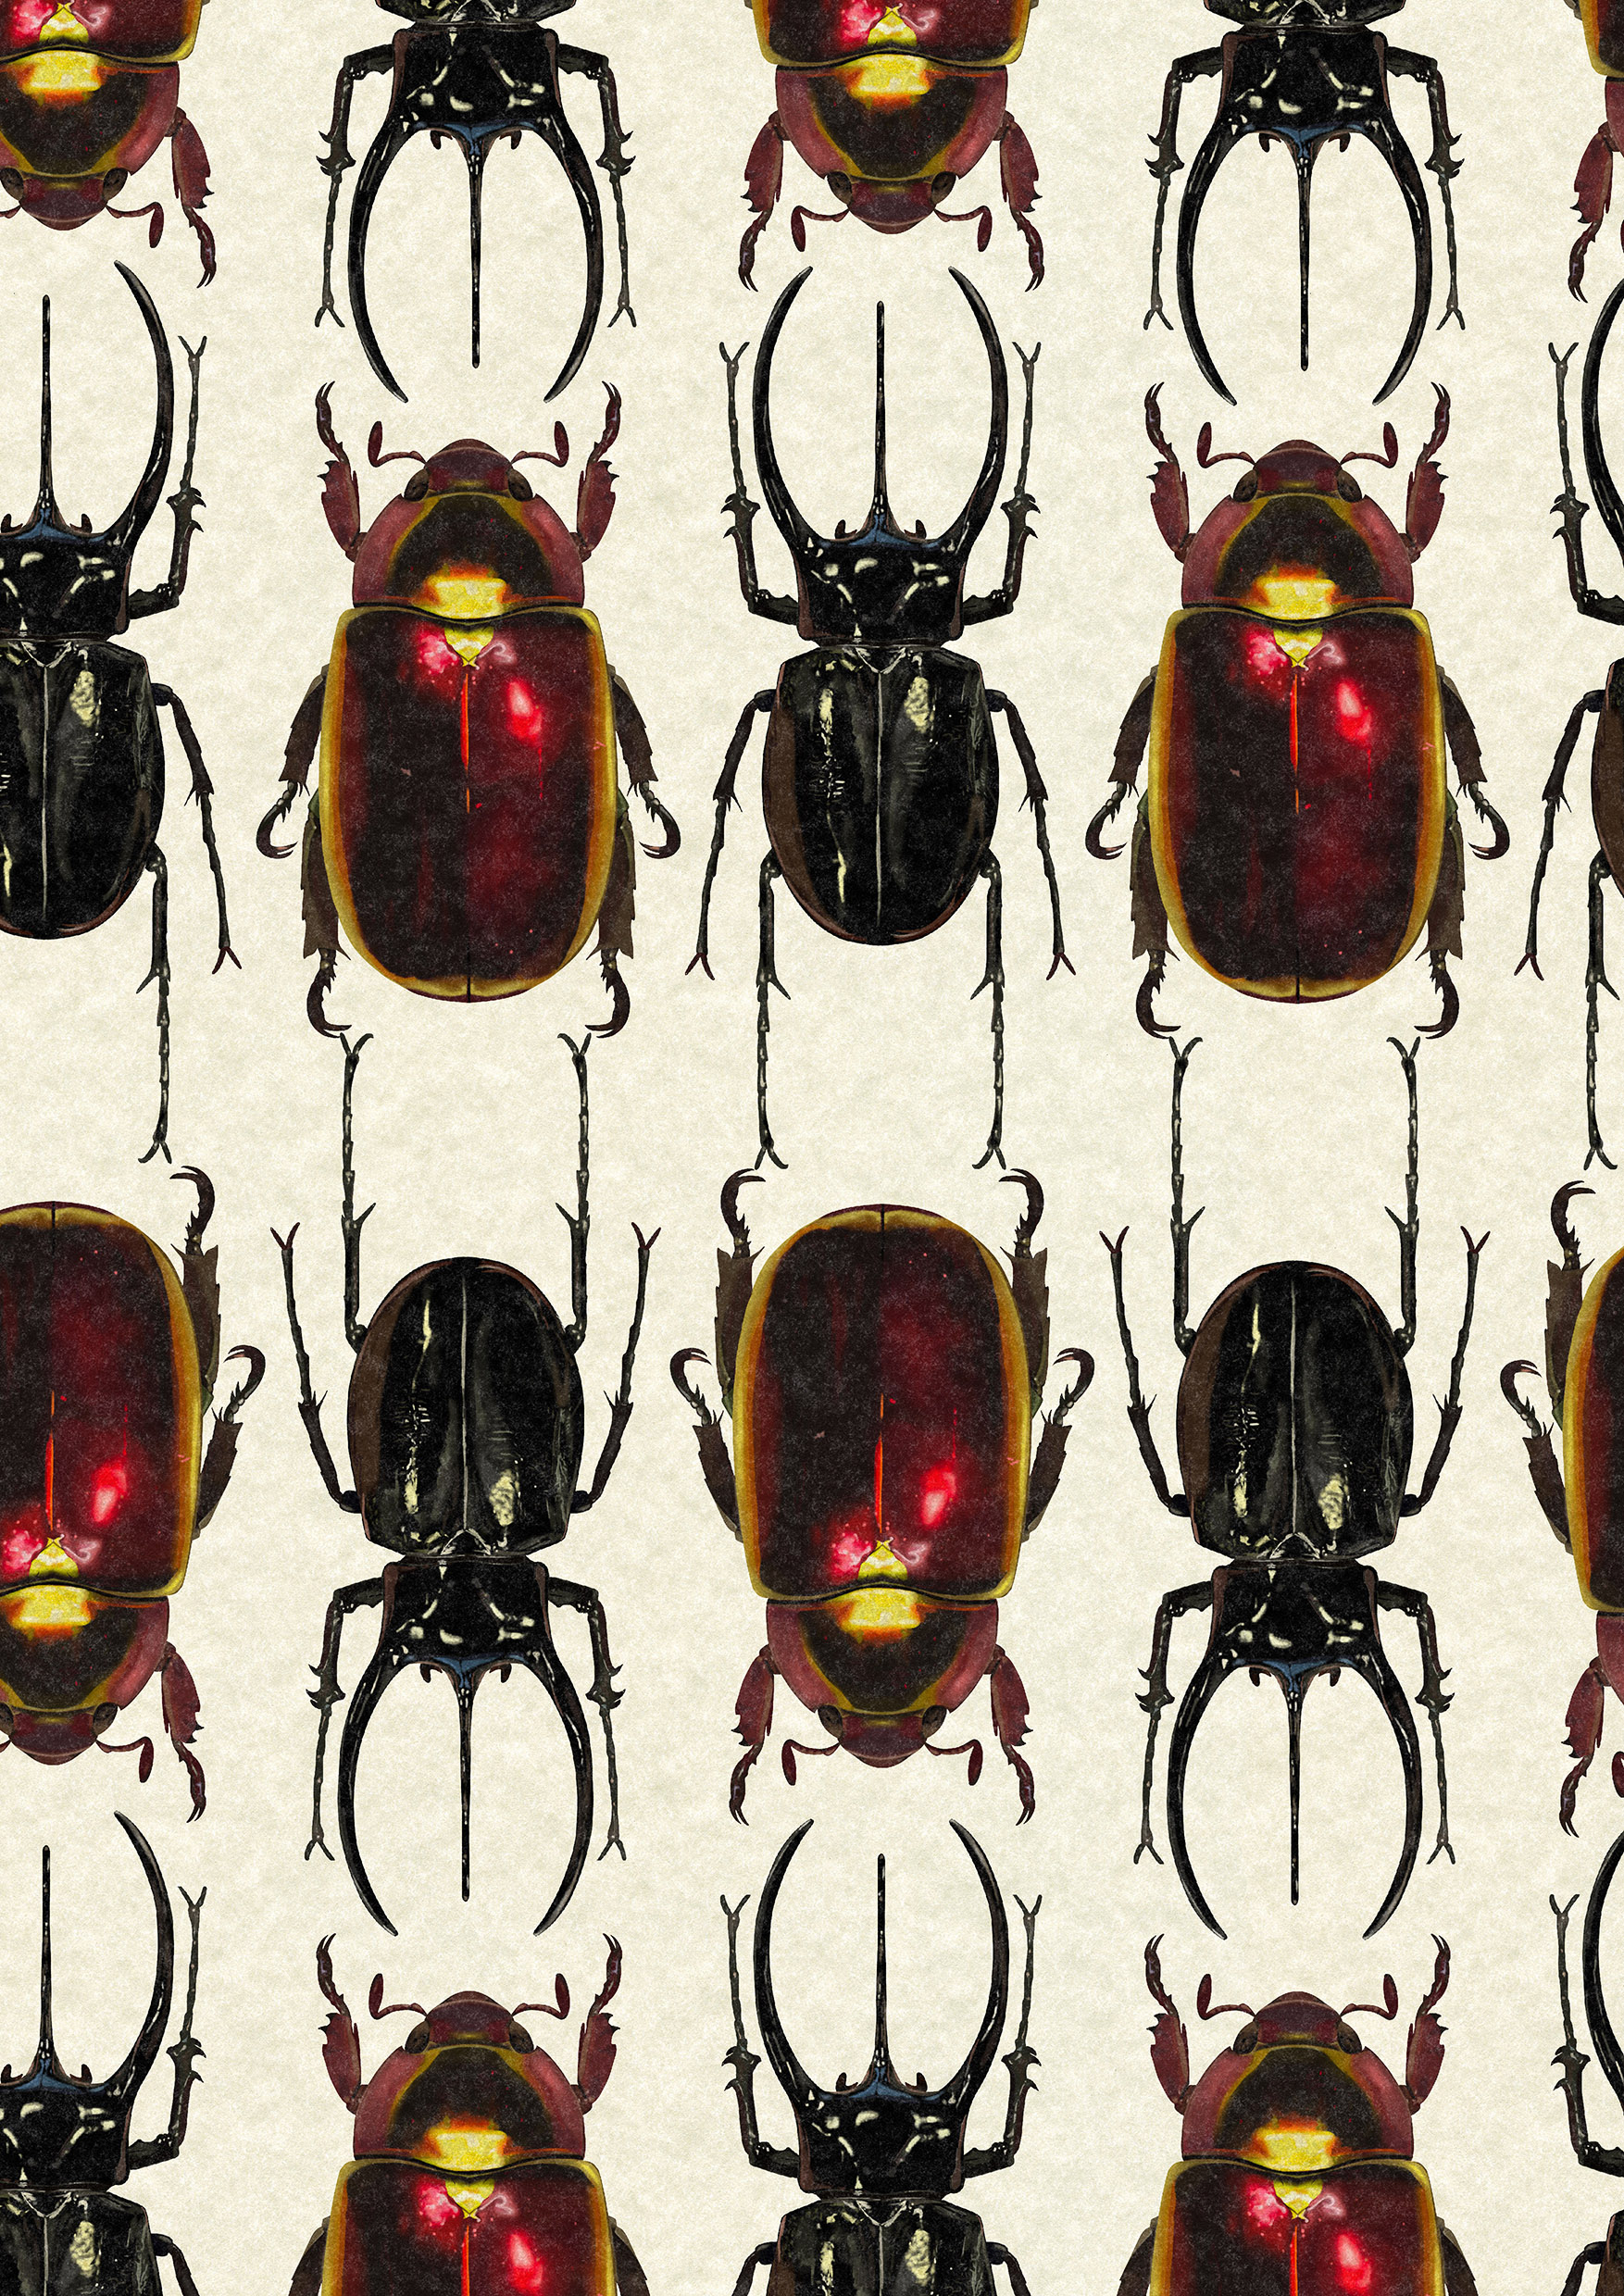 BA Illustration work by Chloe Smith showing an alternating pattern between the black Caucasus Beetle and red holographic Golden Scarab Beetle